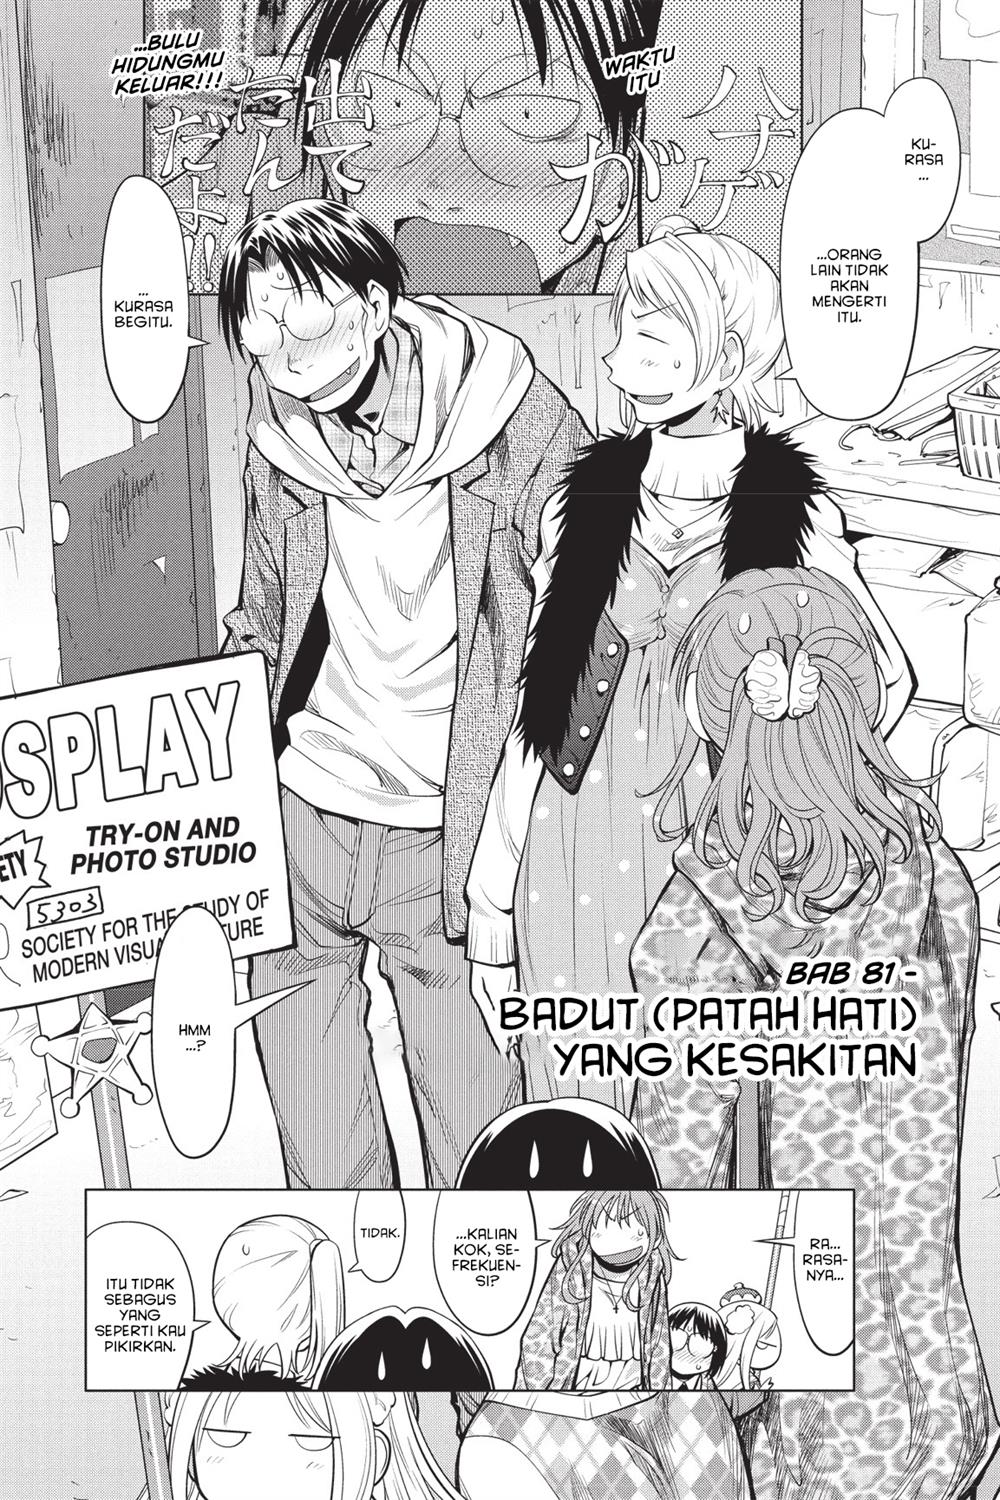 Genshiken – The Society for the Study of Modern Visual Culture Chapter 81 Image 1